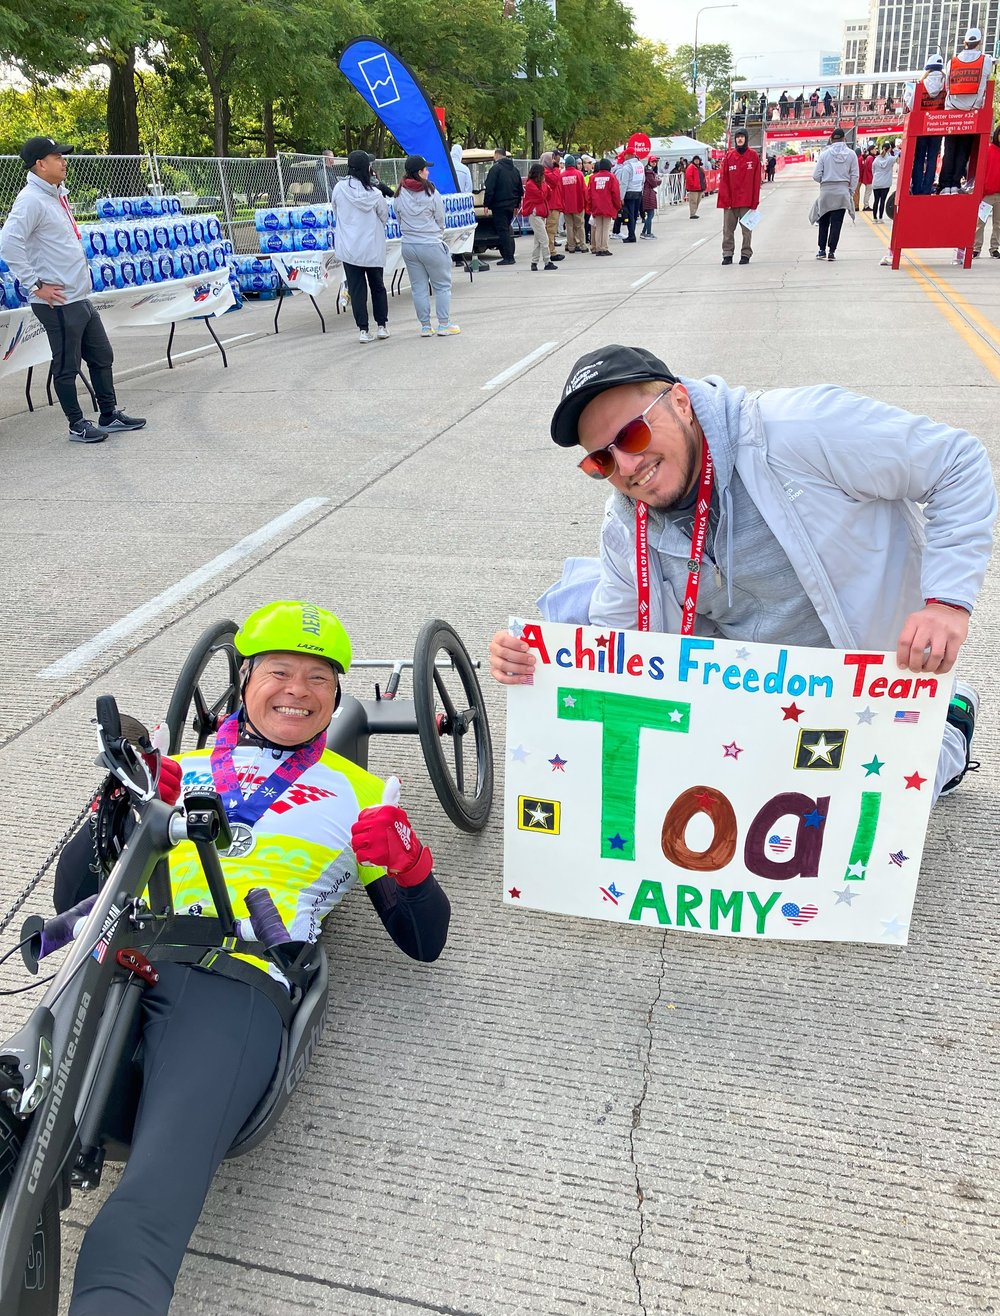  Achilles Freedom Team member, Toai, posing with a hand made sign cheering him on 